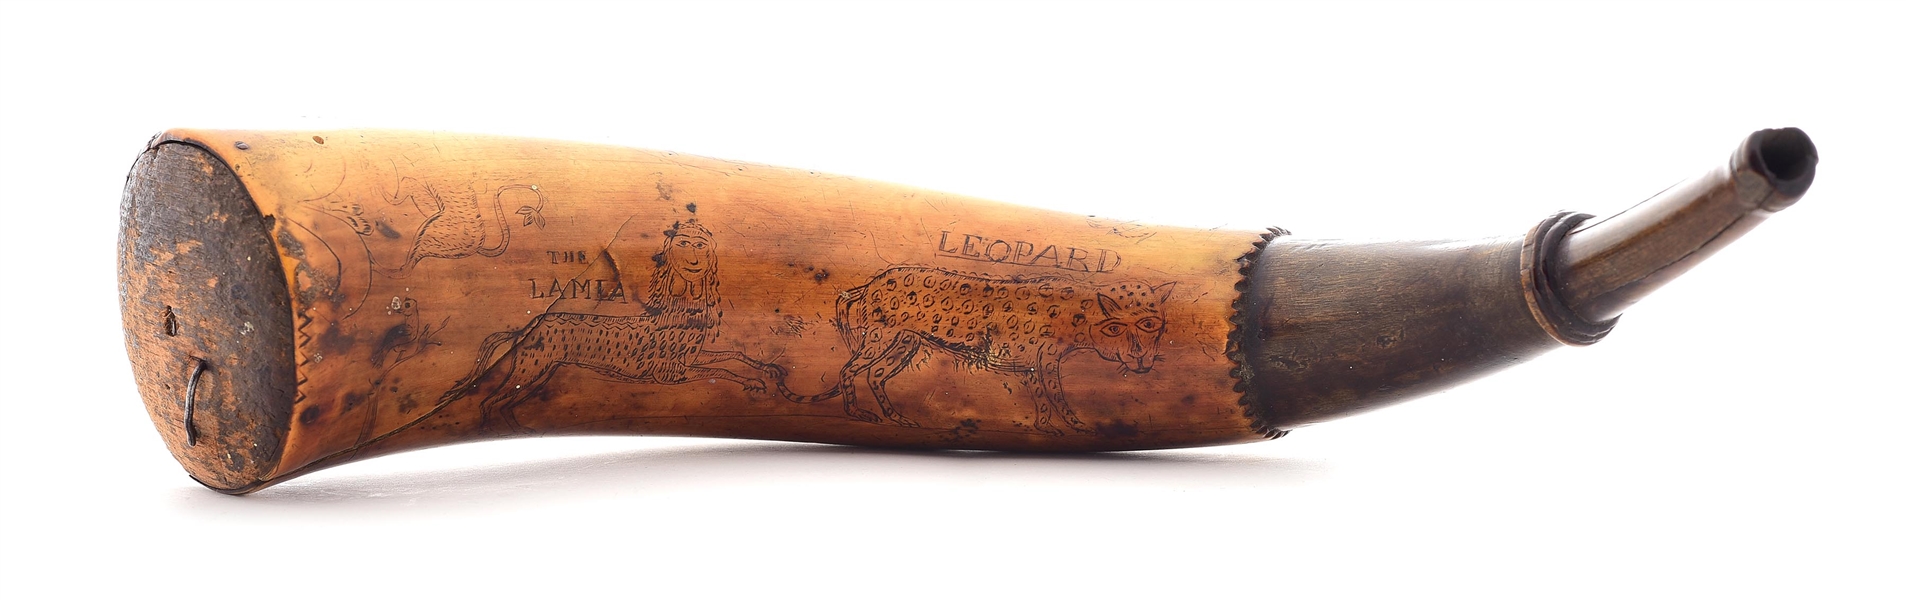 DOCUMENTED JACOB GAY ENGRAVED POWDER HORN OF JACOB KNOX.